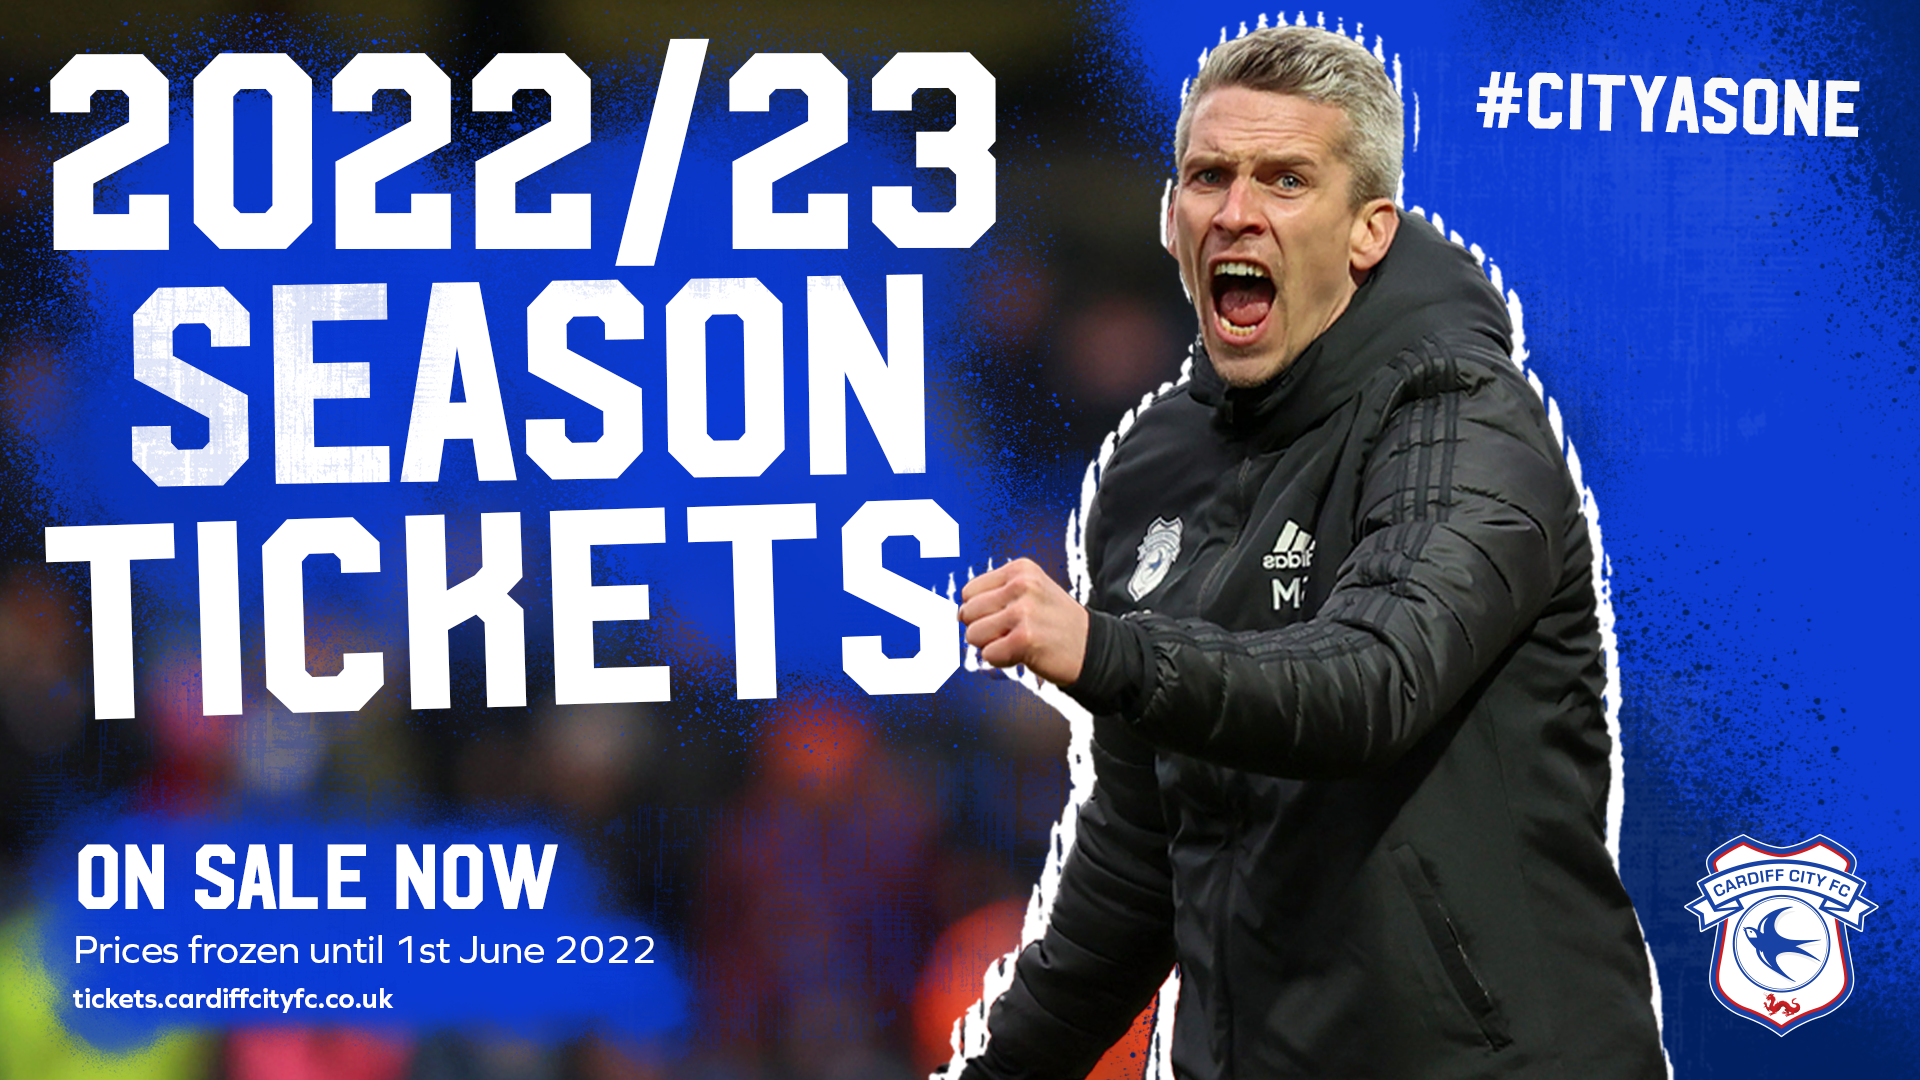 Season Tickets are now on sale...